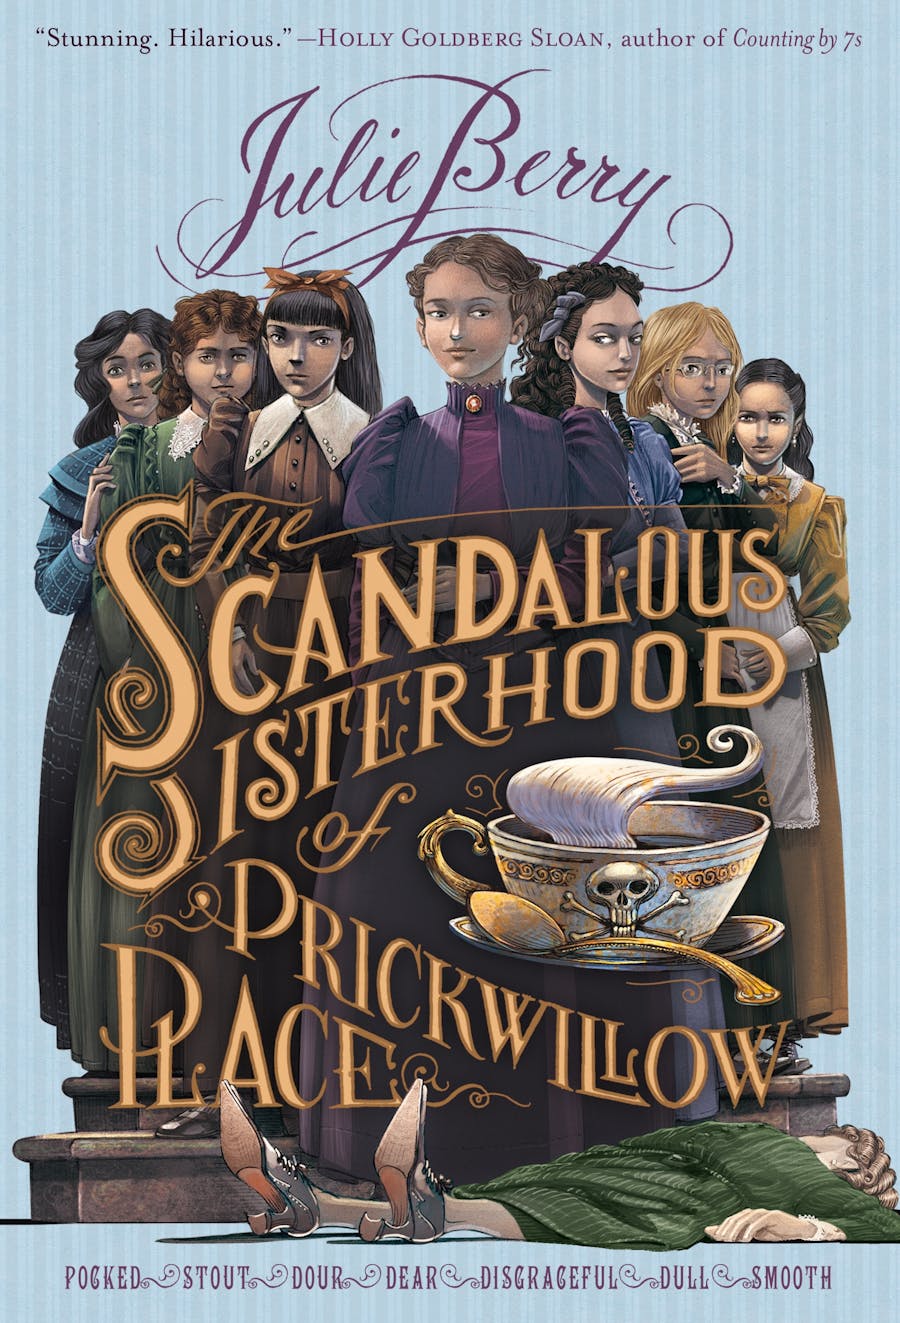 The-scandalous-sisterhood-of-prickwillow-place-book-cover